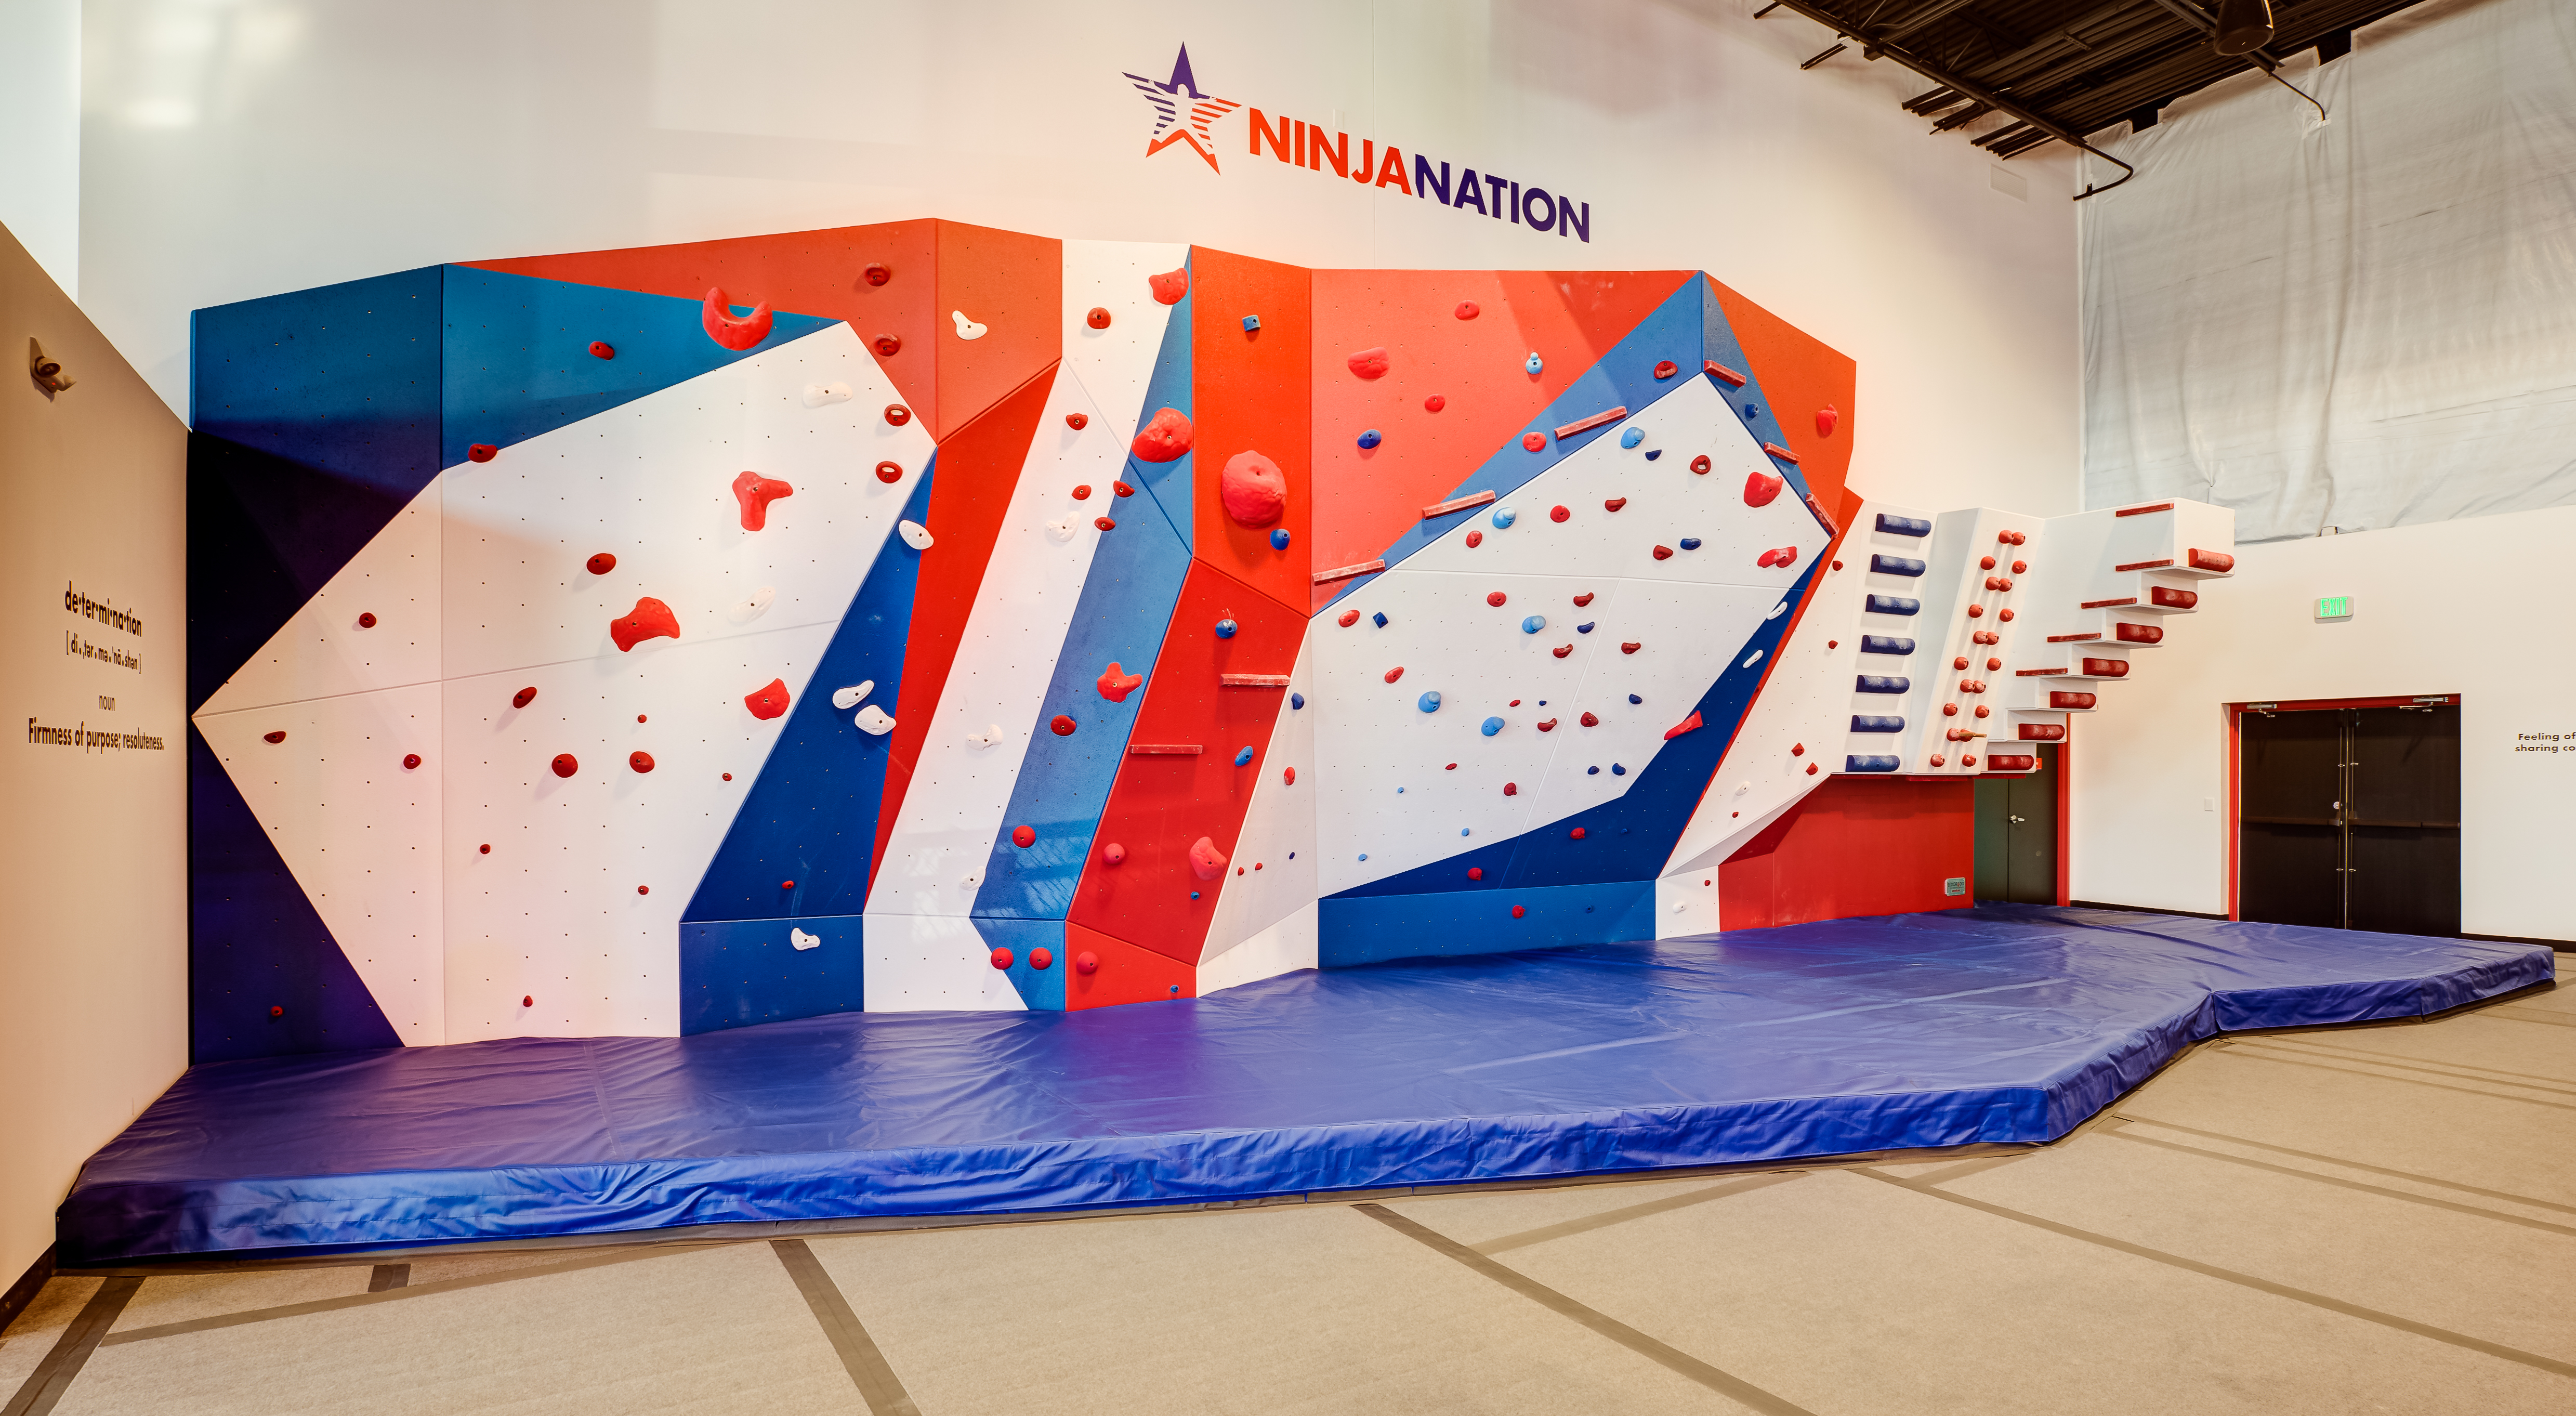 Ninja Nation; a Top Franchise Opportunity in the Houston Area